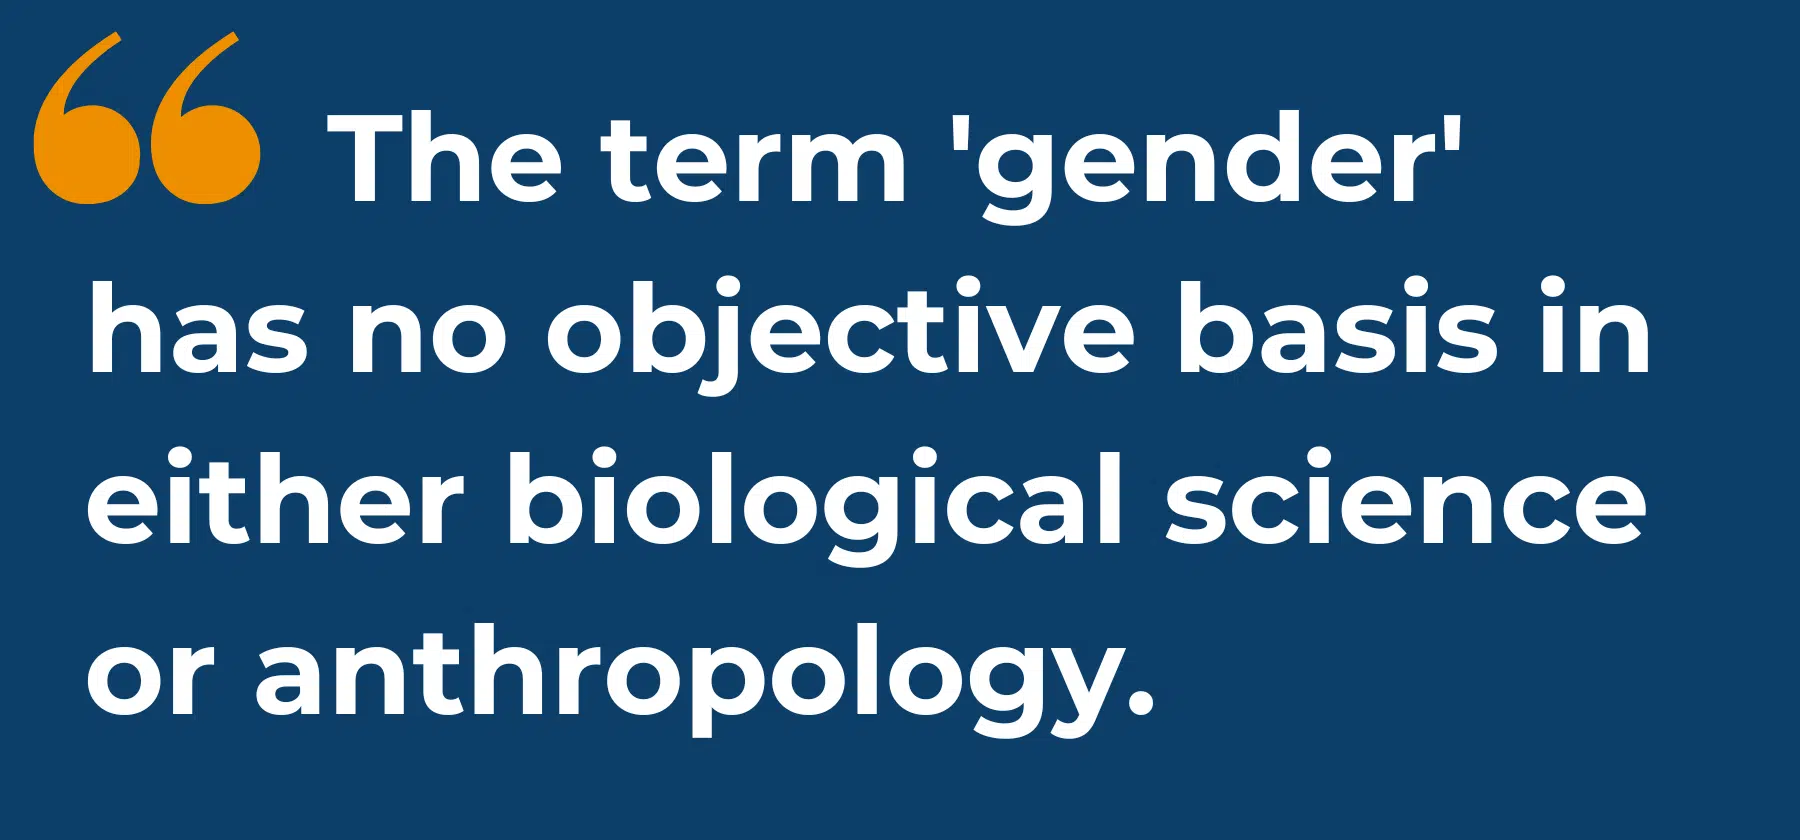 quotation saying that gender is subjective